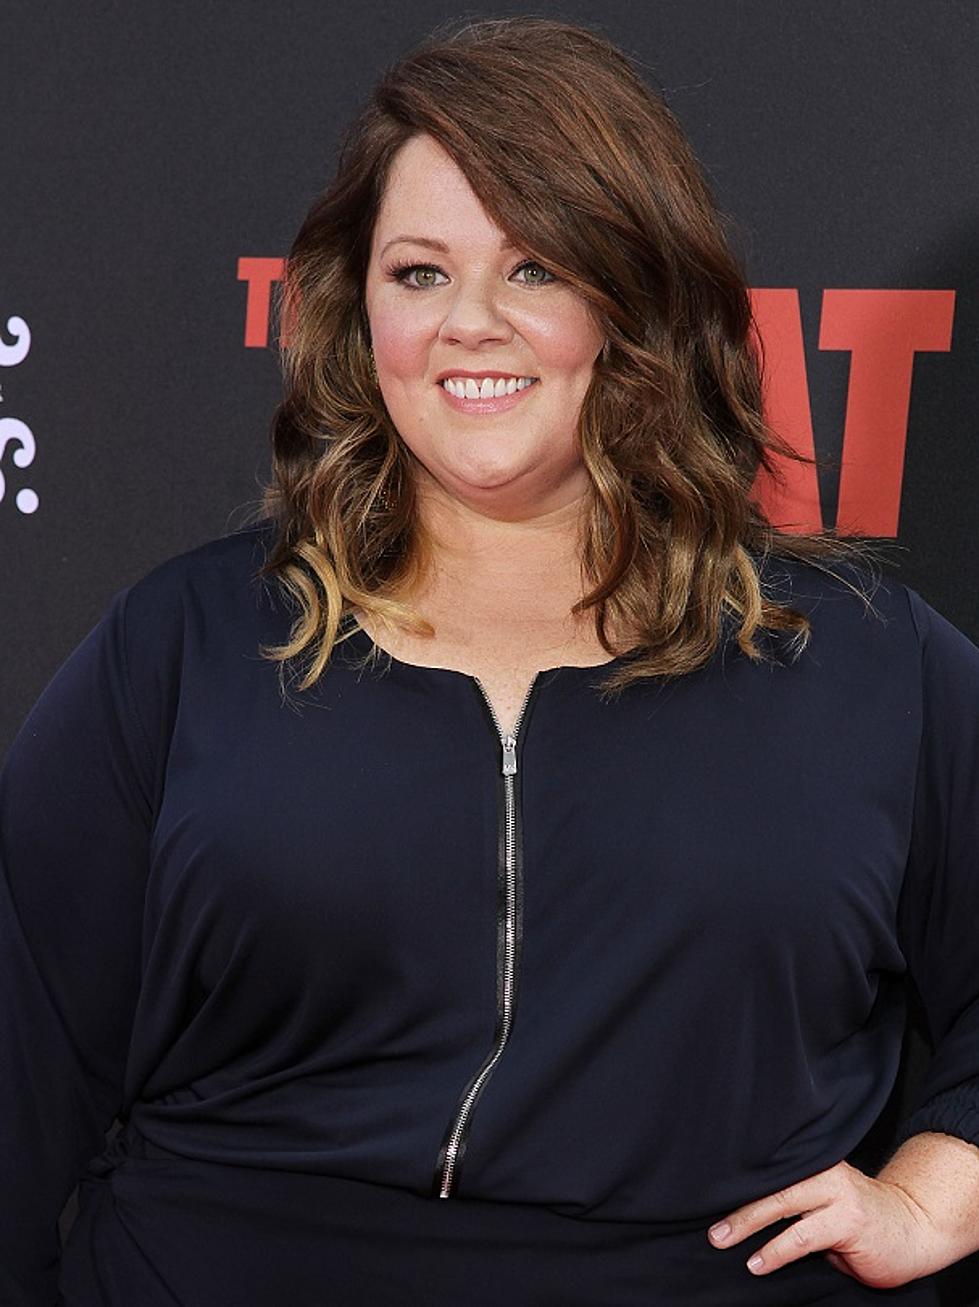 Hollywood Dirt – Did ‘Elle’ Cover up Melissa McCarthy Because She’s Full-figured?